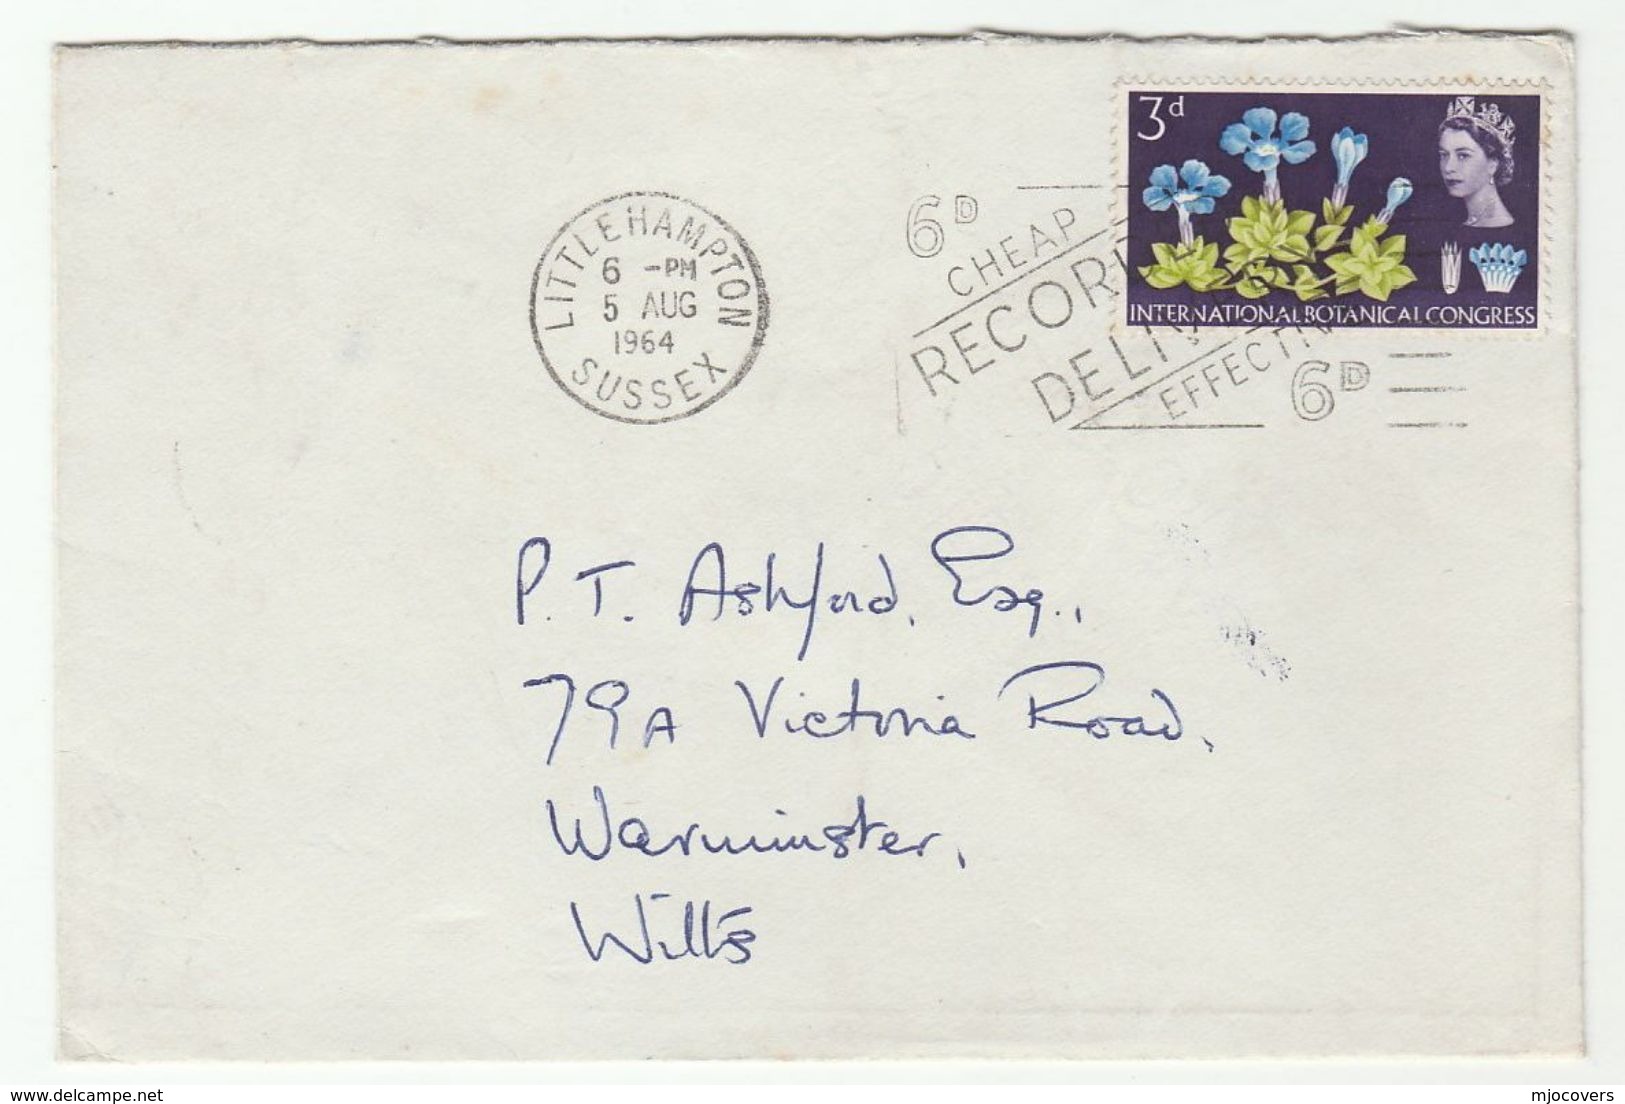 1964 Littlehampton GB FLOWERS FDC COVER SLOGAN Pmk EFFECTIVE RECORDED DELIVERY Flower Stamps - 1952-1971 Pre-Decimal Issues